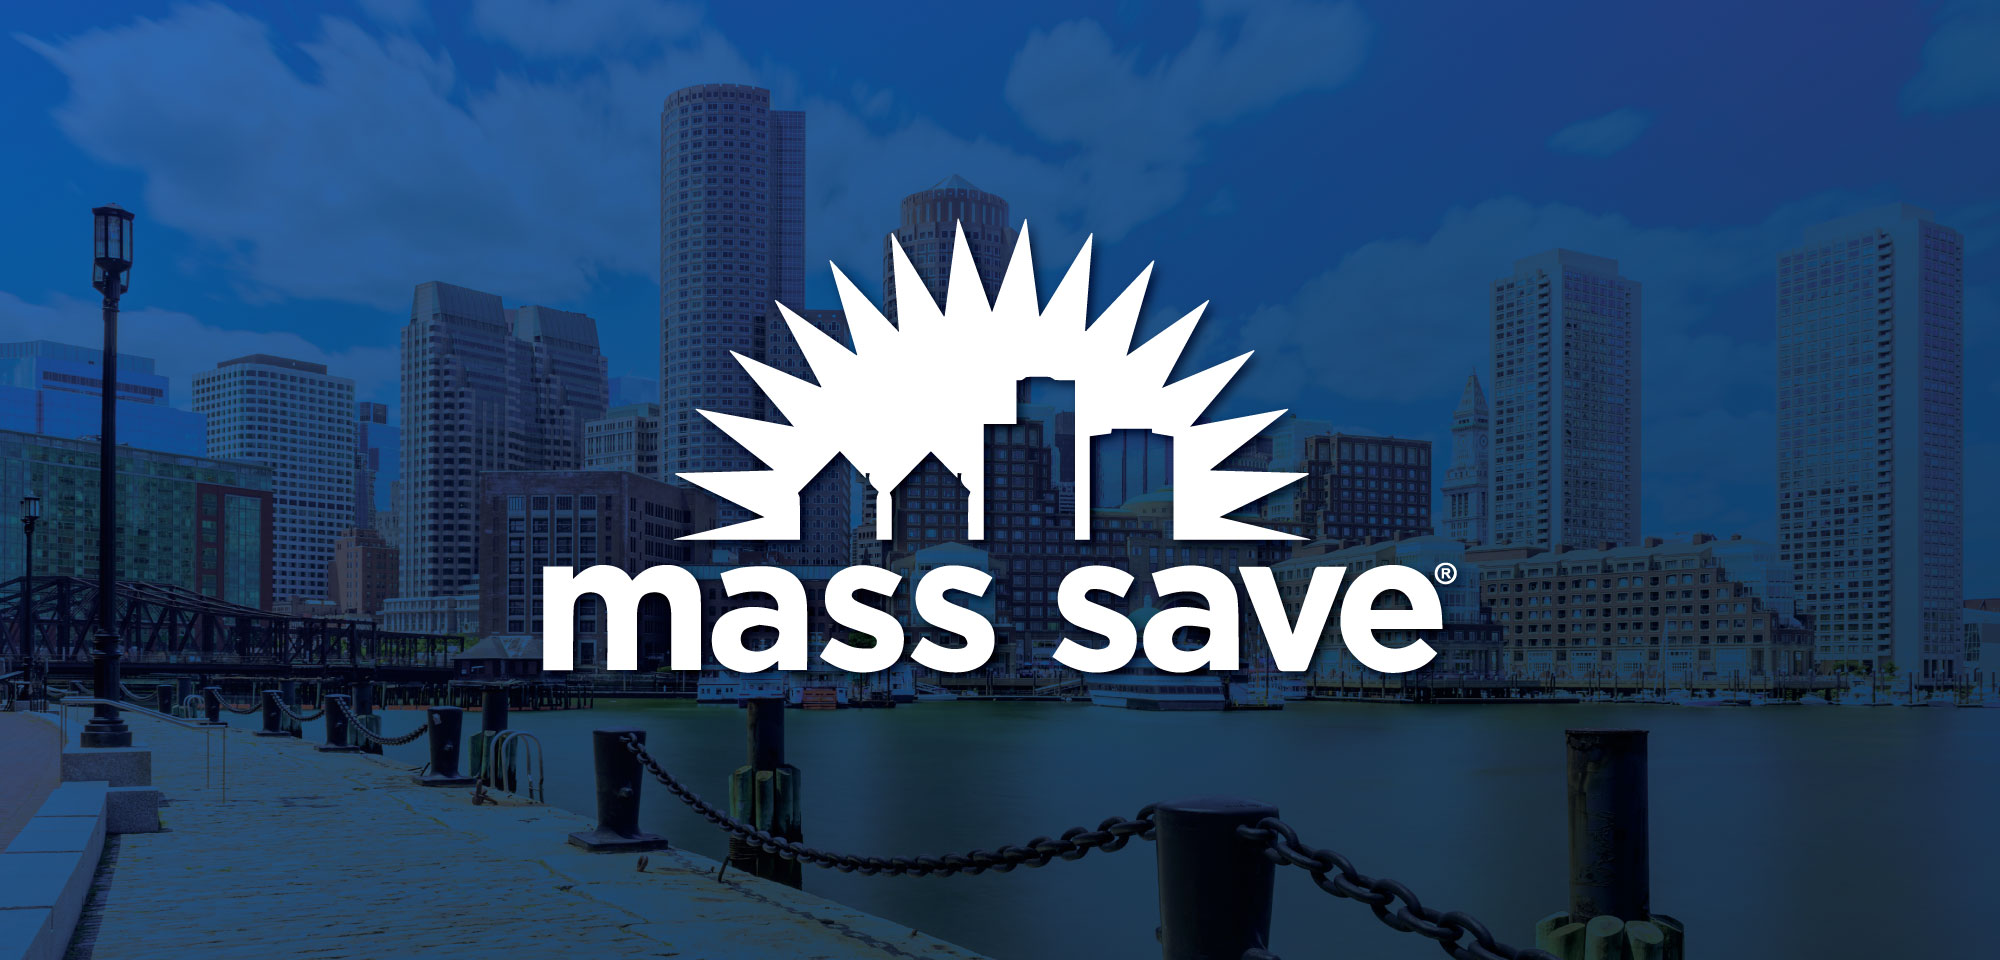 How Mass Save can help cut your energy costs